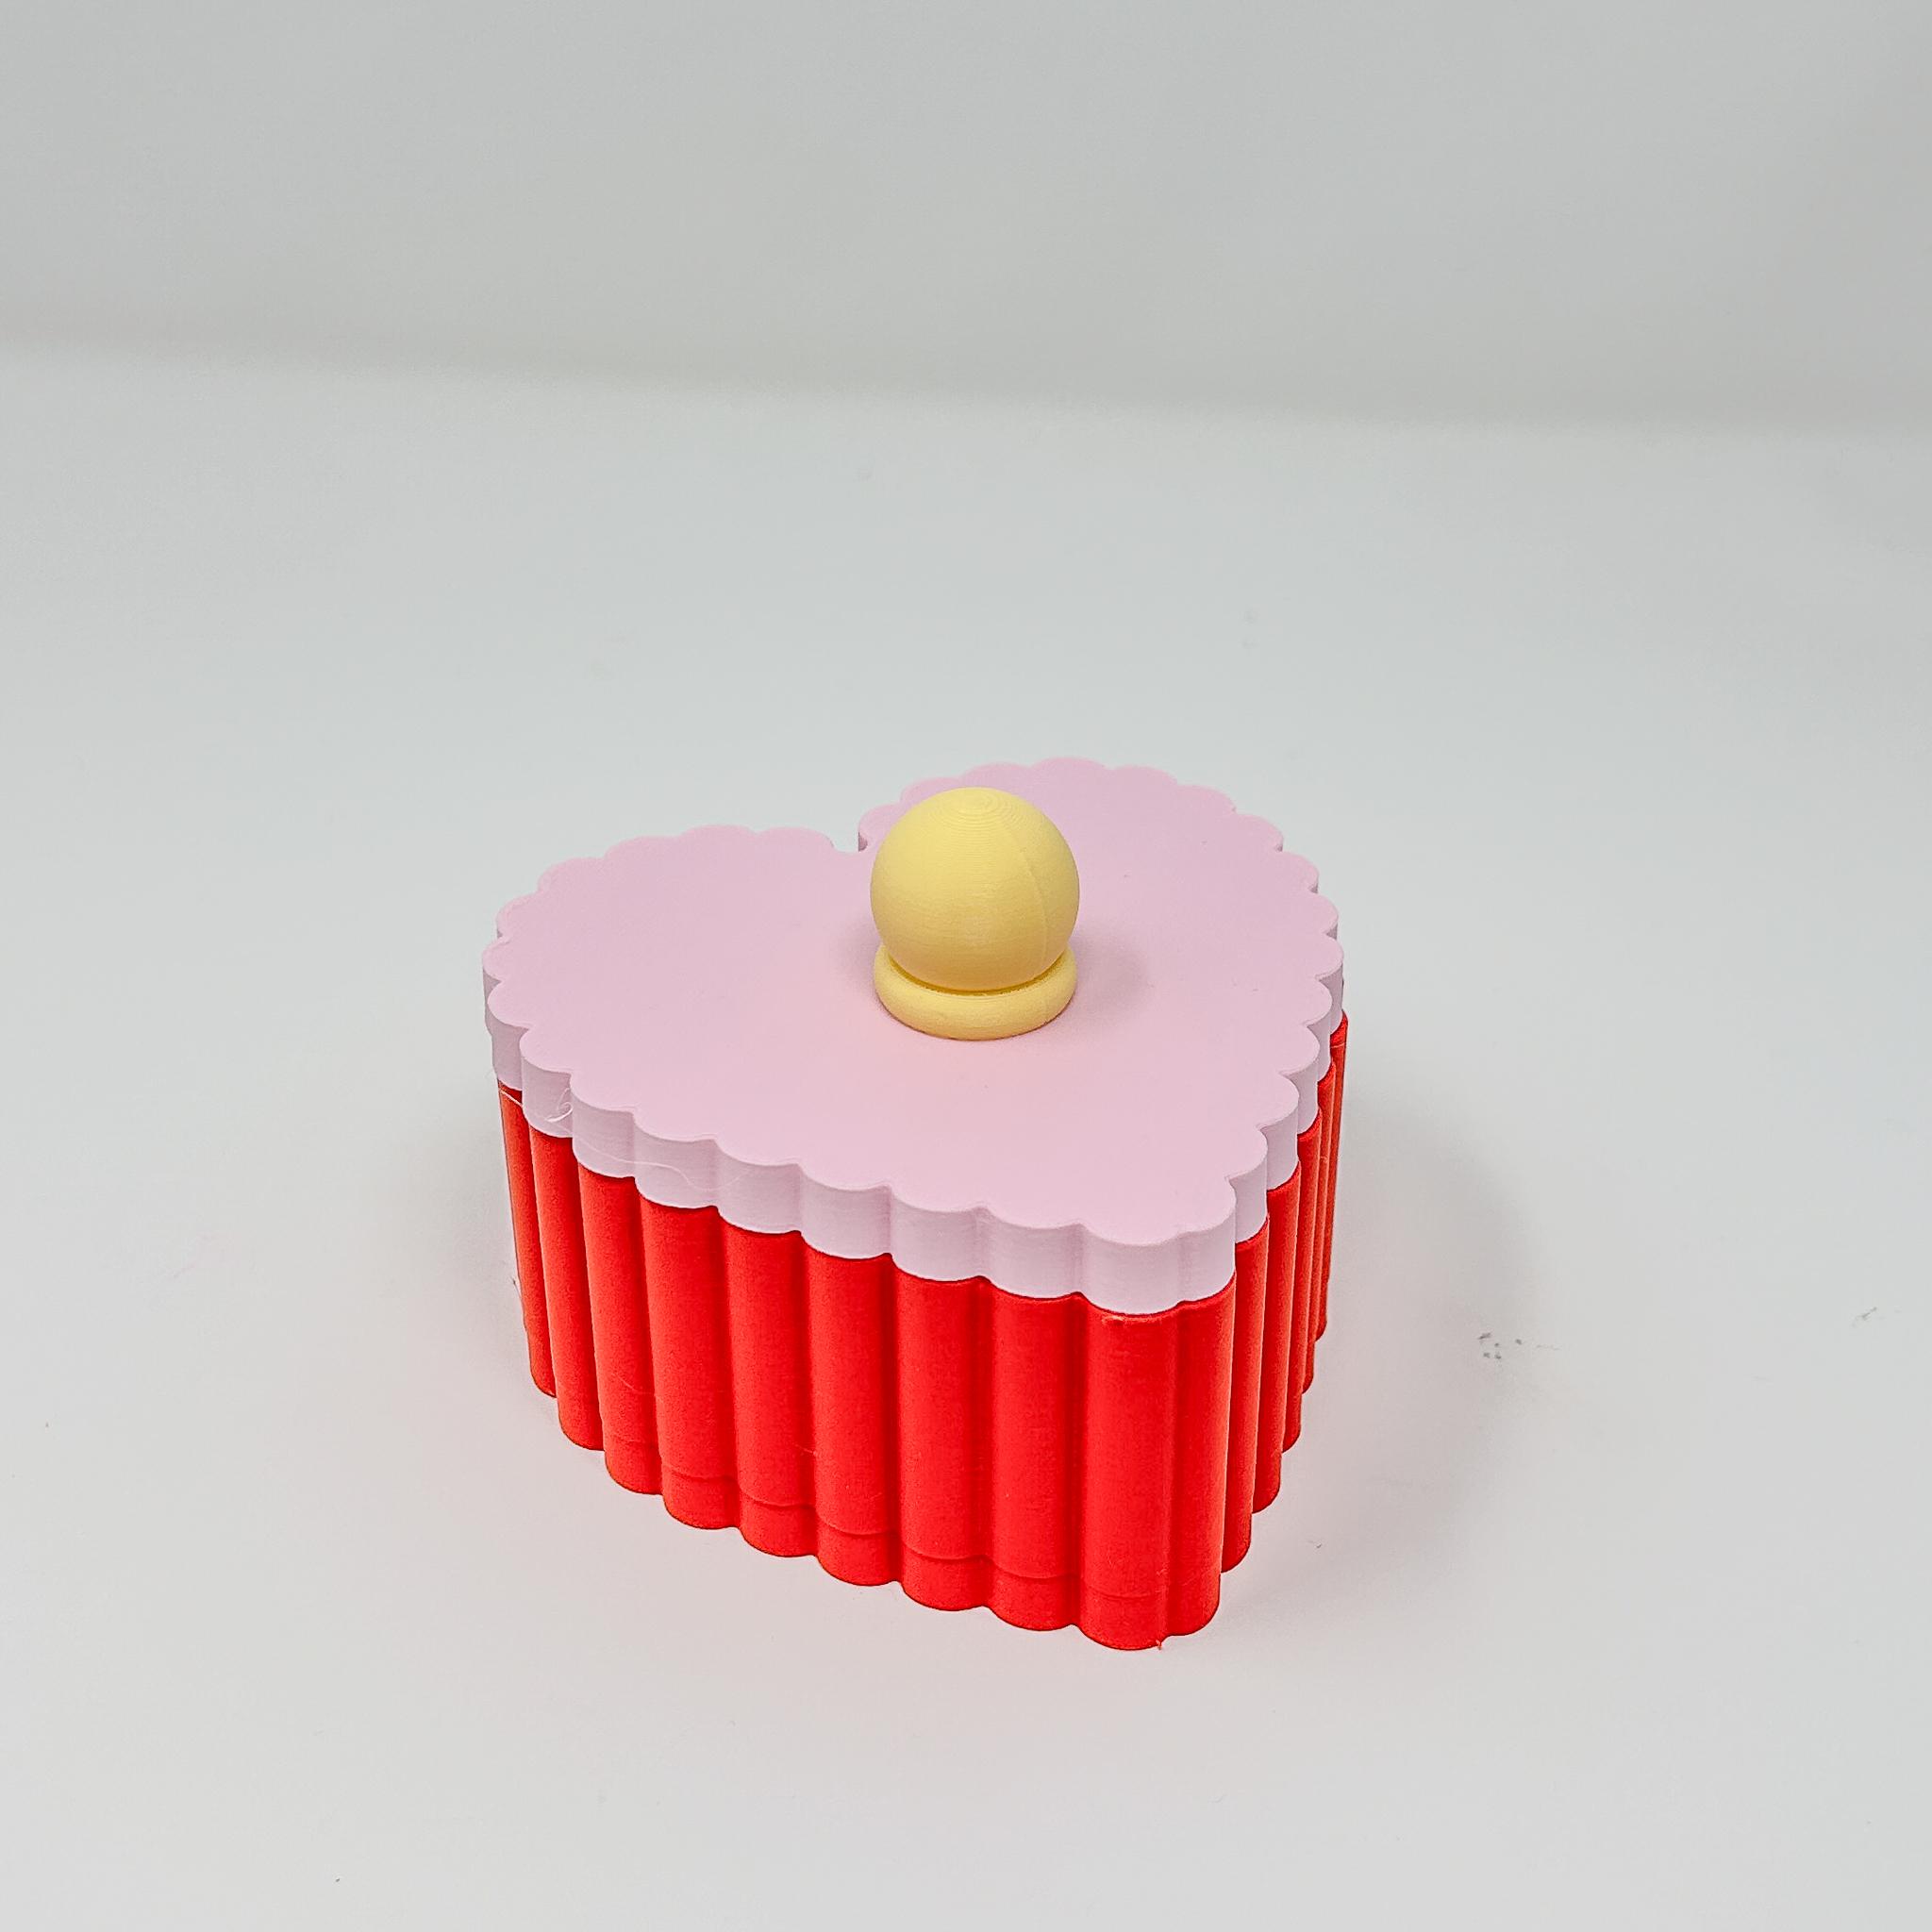 Free for One Week! - Retro Pleated Heart Trinket Box - Jewelry and Accesories Holder 3d model